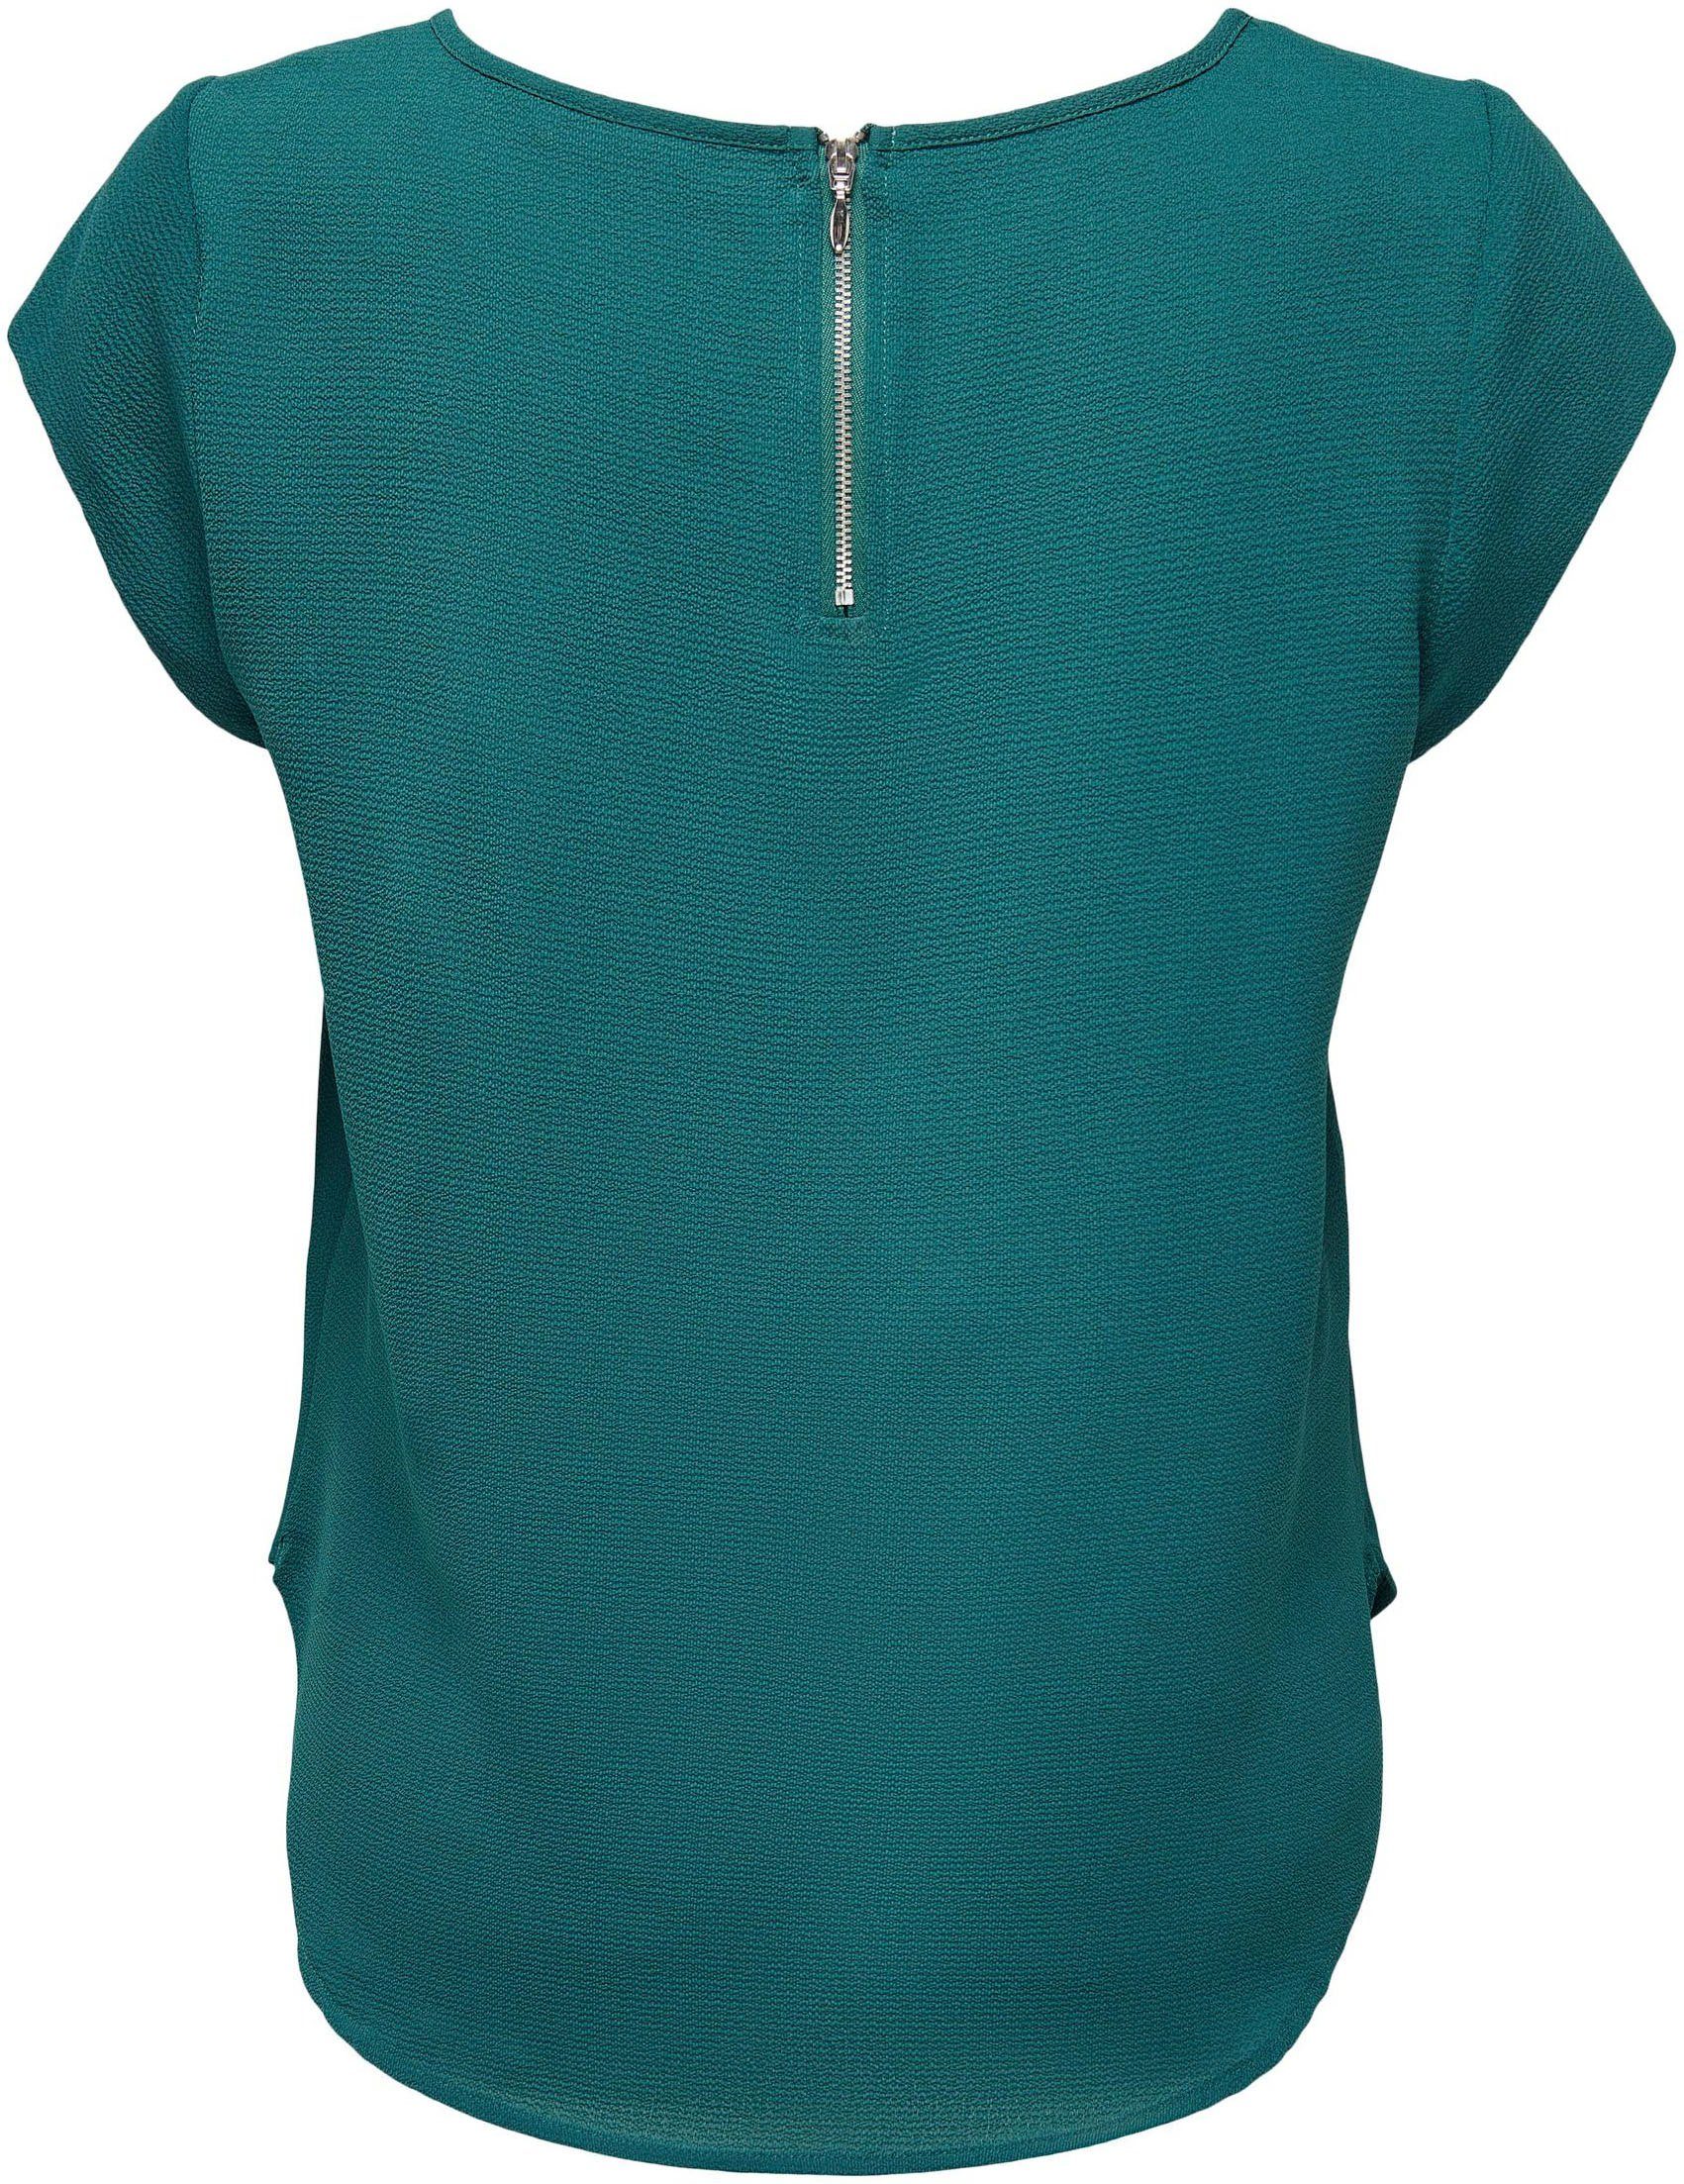 SOLID Kurzarmbluse Teal TOP Deep PTM ONLVIC NOOS S/S ONLY